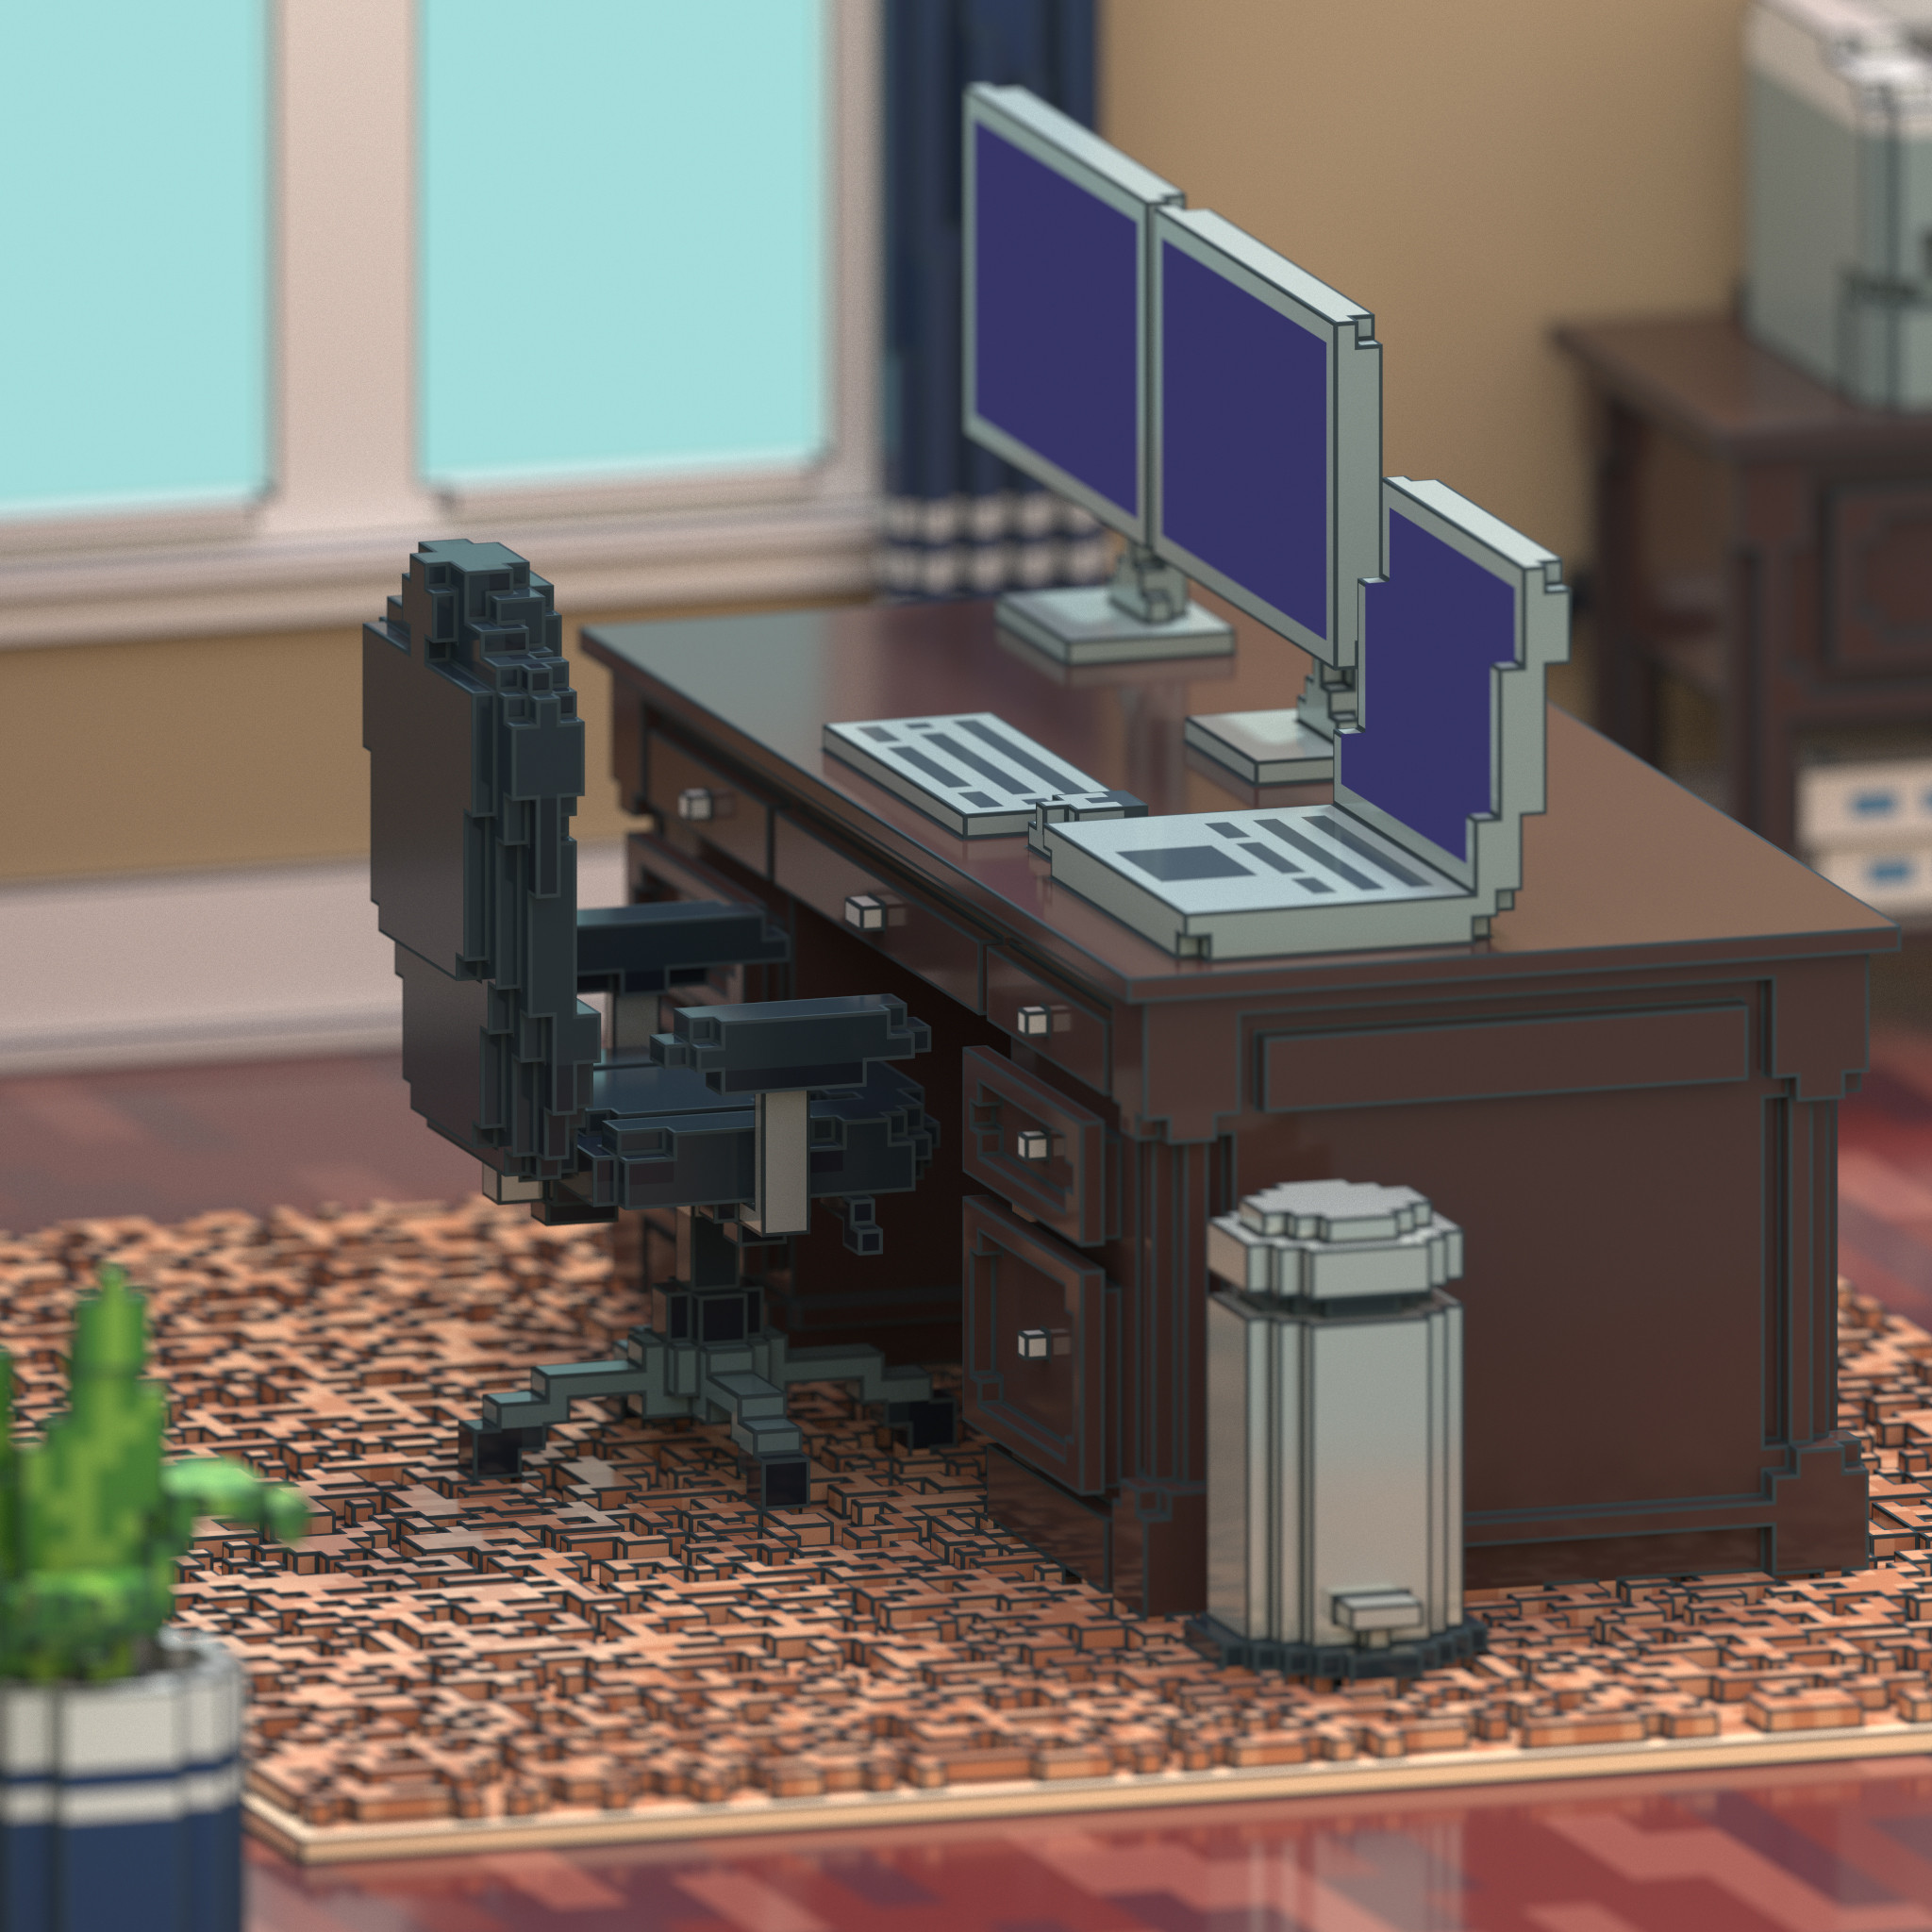 Rendering focusing on the details of the home office executive desk, chair and dual-monitor workstation setup.